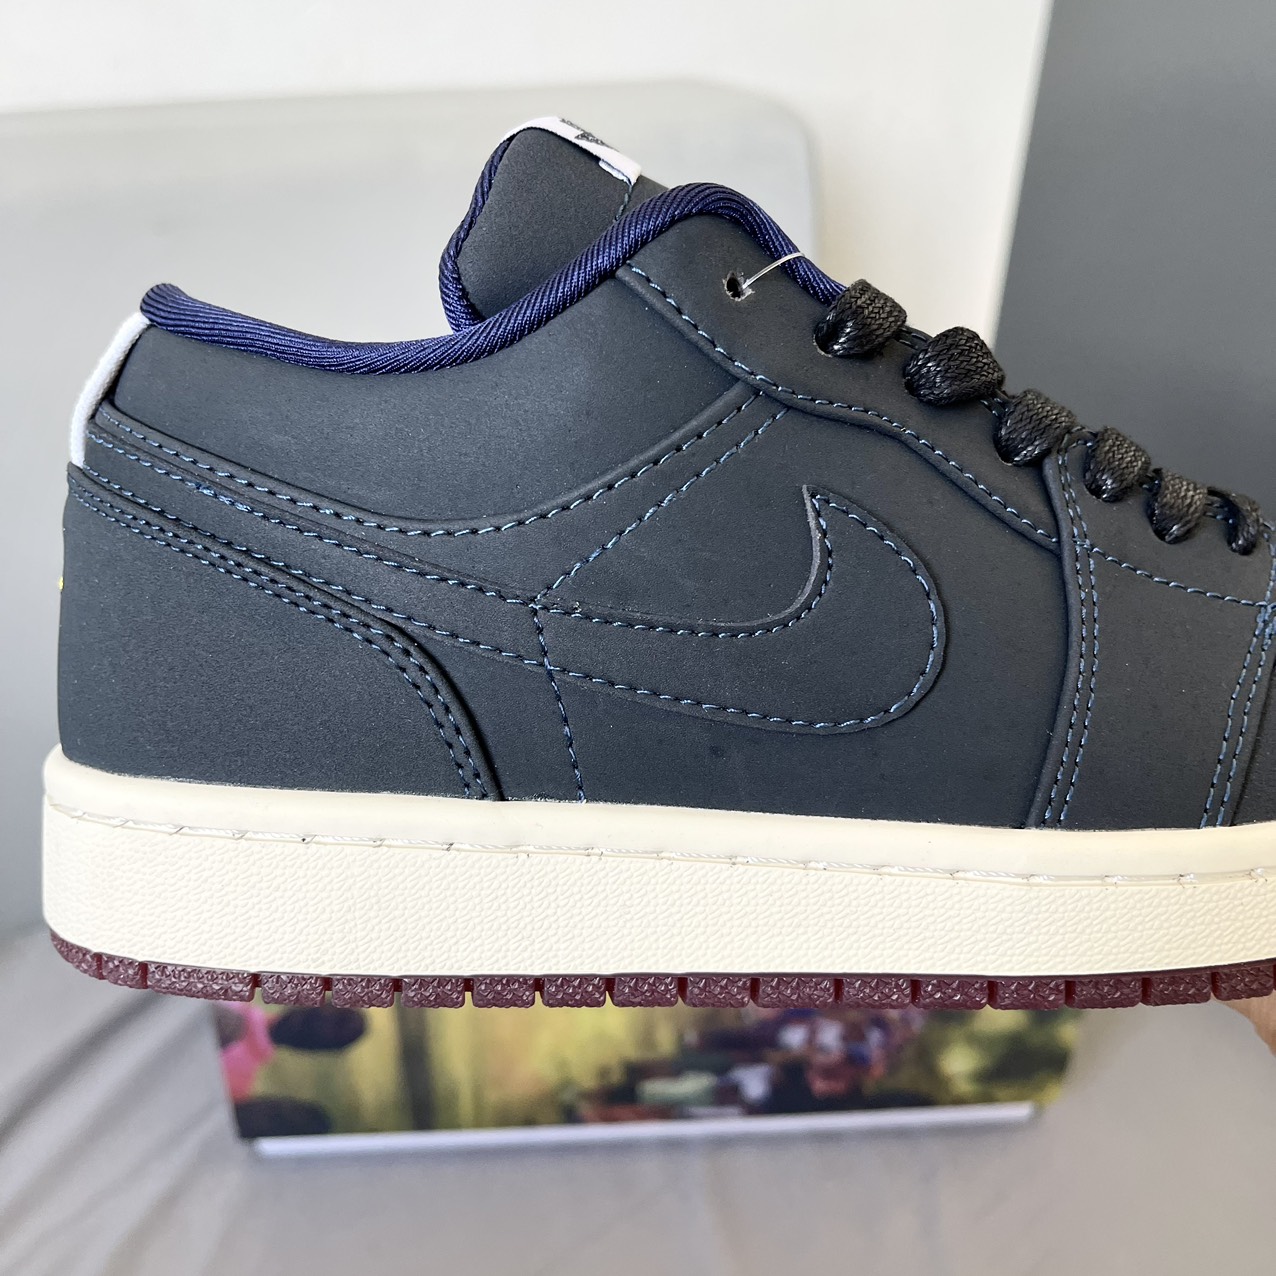 Giày Nike Air Jordan 1 Low Eastside Golf Out of the Mud Like Auth